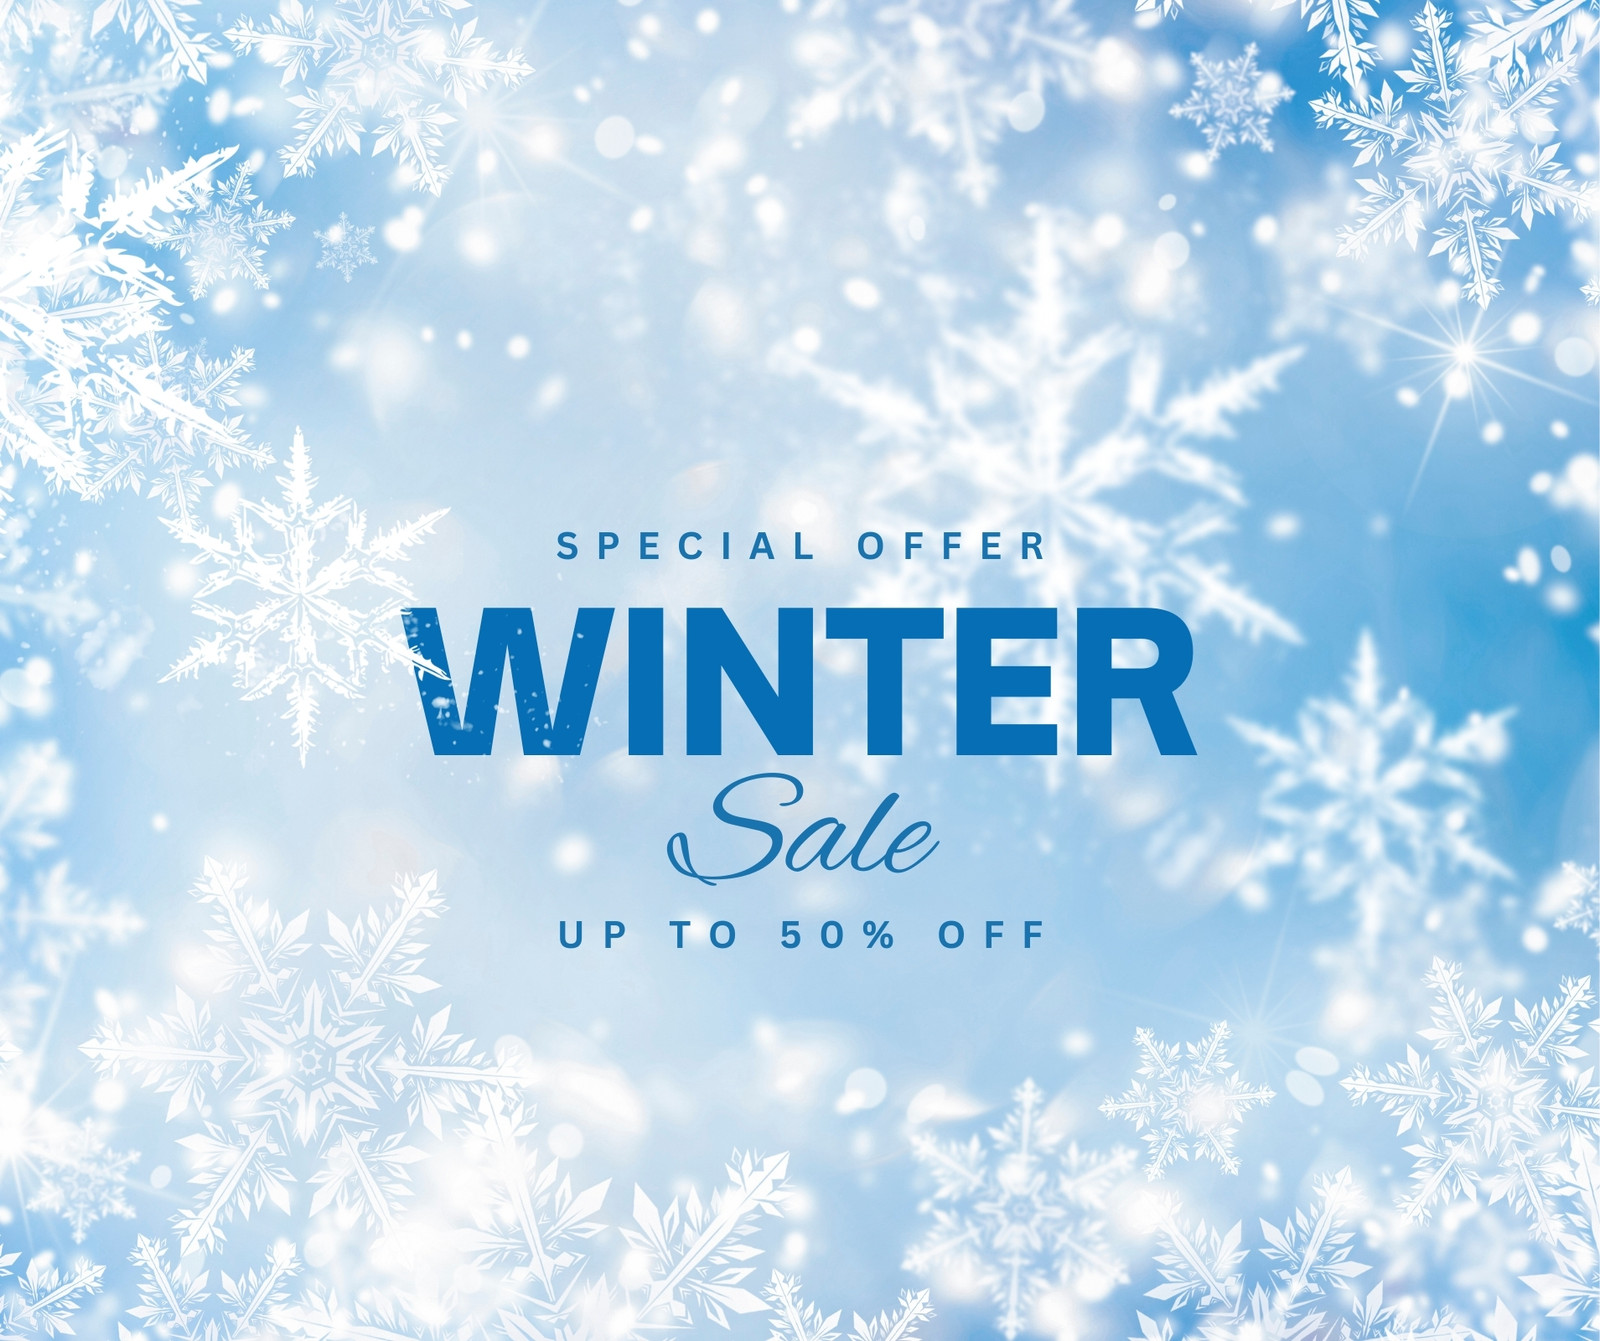 https://marketplace.canva.com/EAFxiwZy2_s/2/0/1600w/canva-blue-and-white-winter-sale-facebook-post-X9_khS-EG-k.jpg